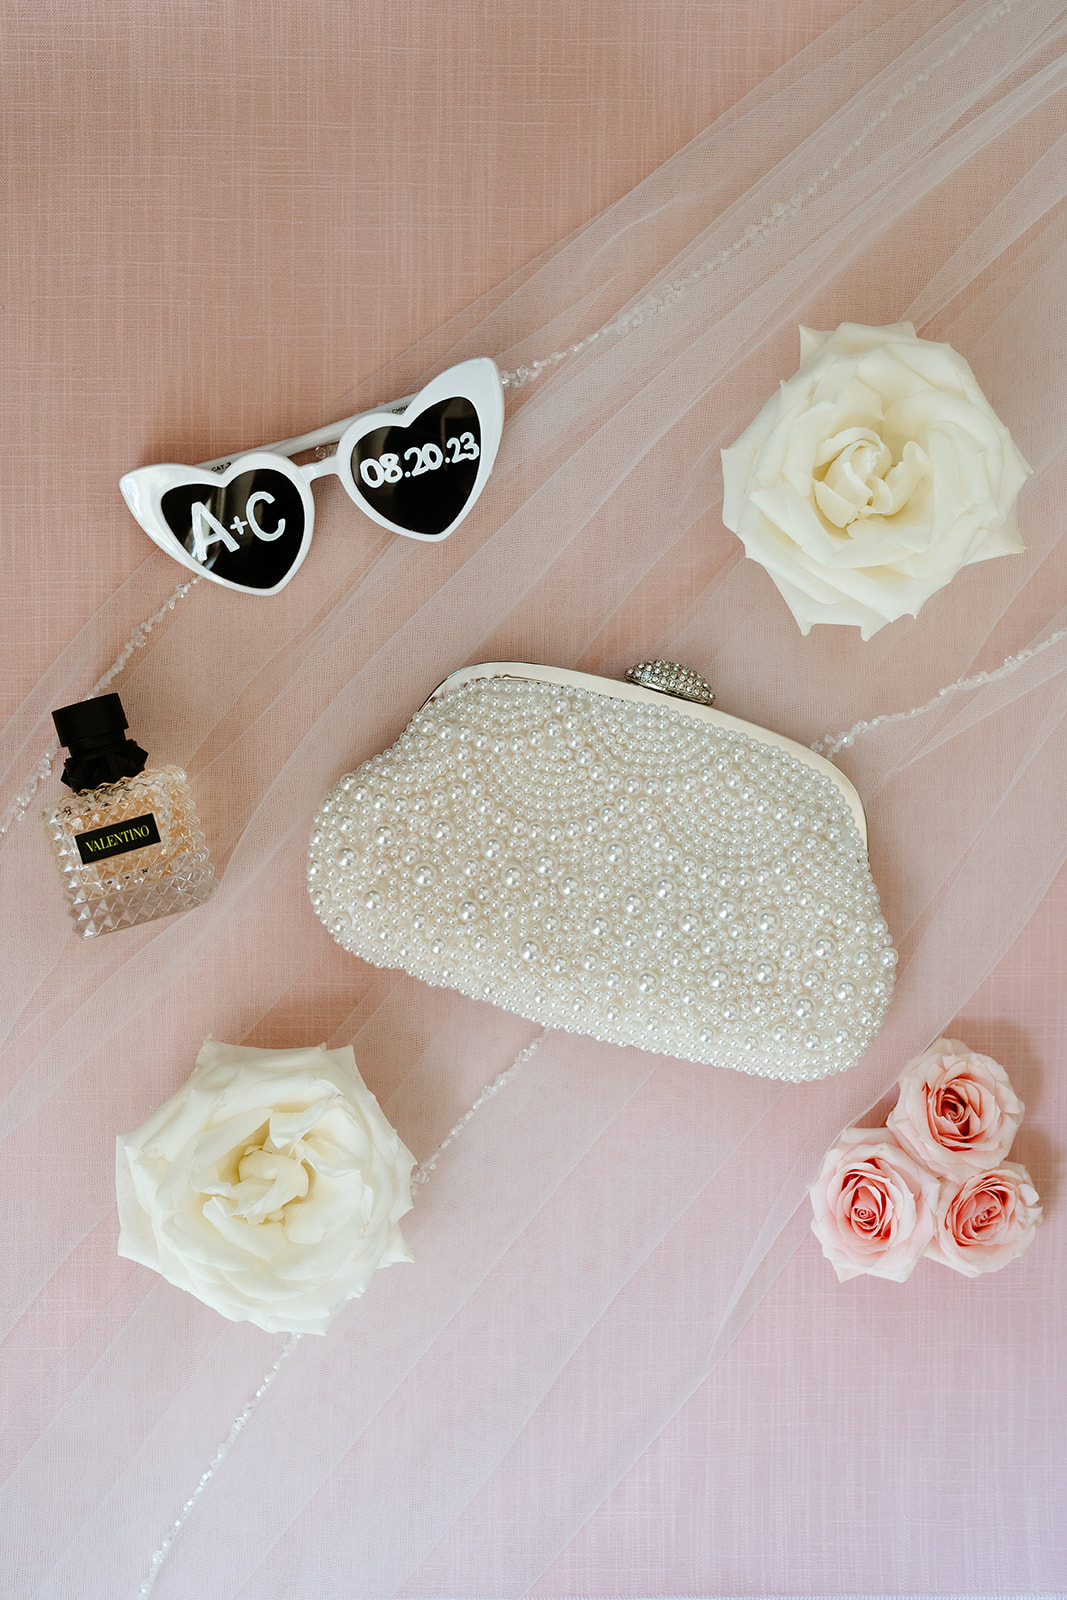 A pair of white women's sunglasses, perfume and handbag surrounded by scattered rose petals and a few full blooms.